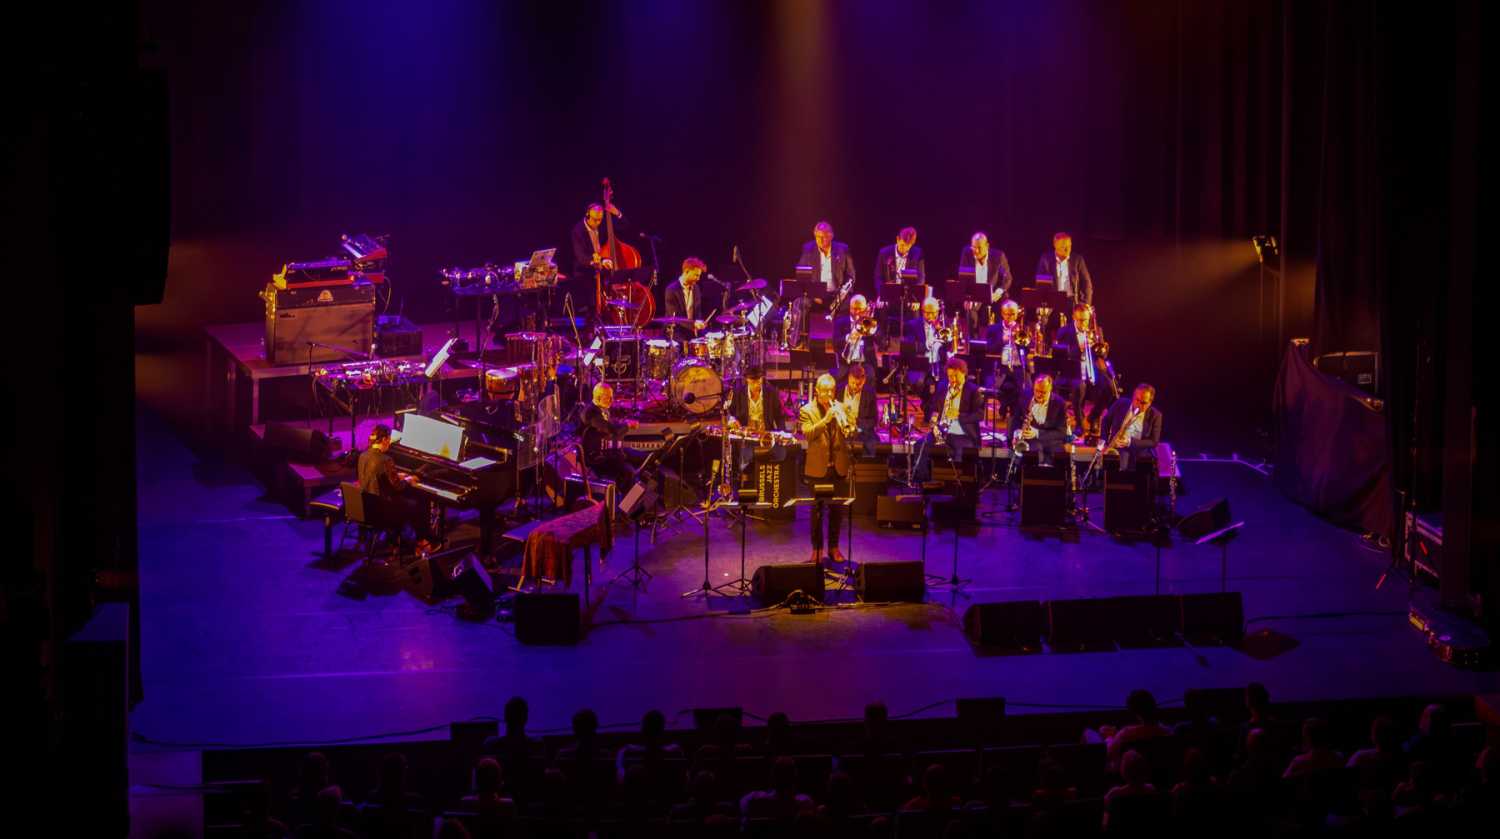 BJO30 was a celebration of the orchestra’s achievements over the last 30 years